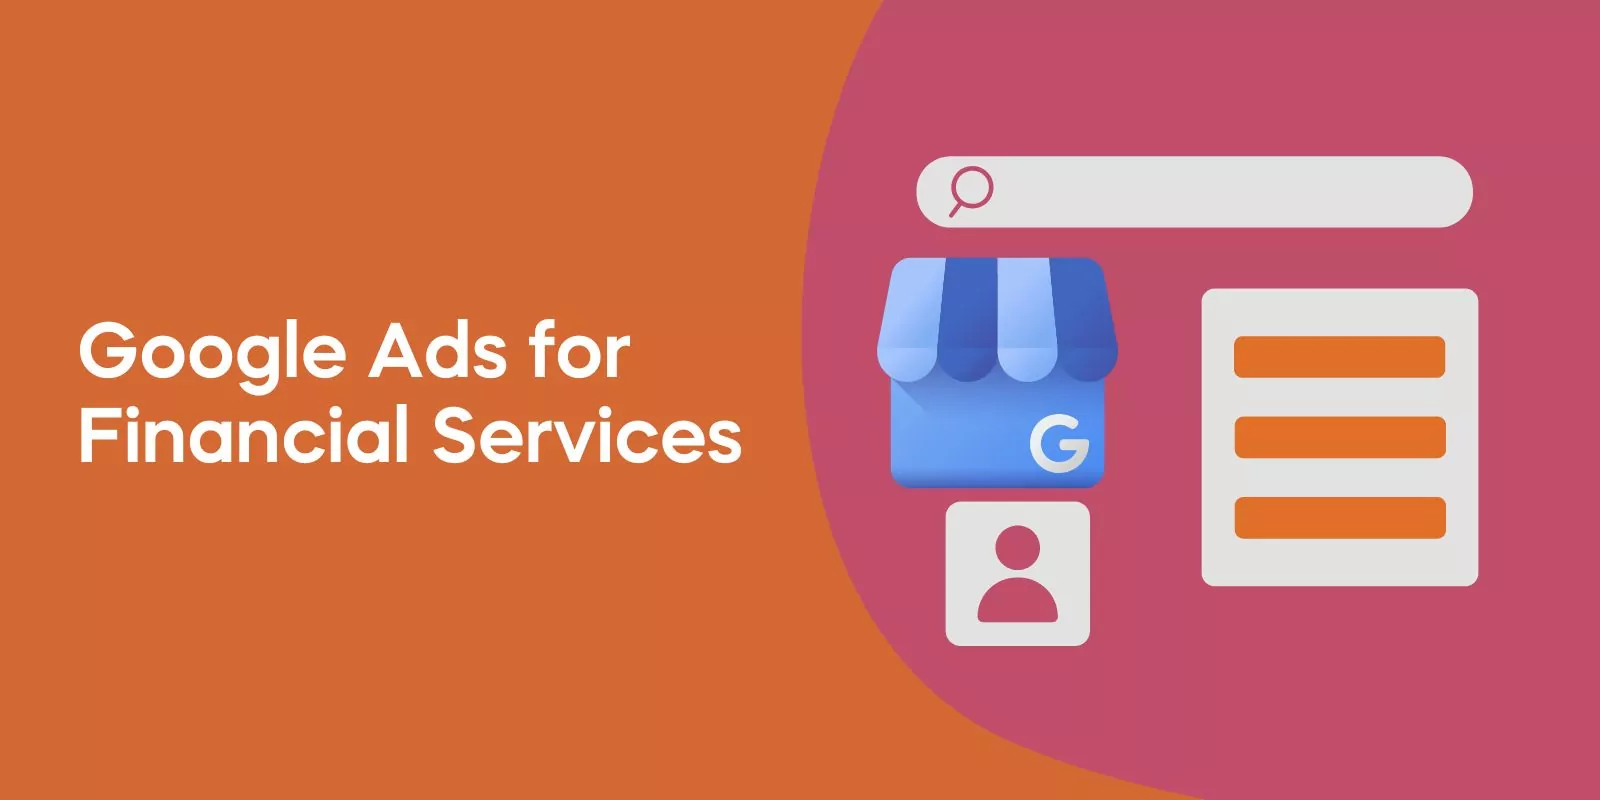 Google Ads for Financial Services